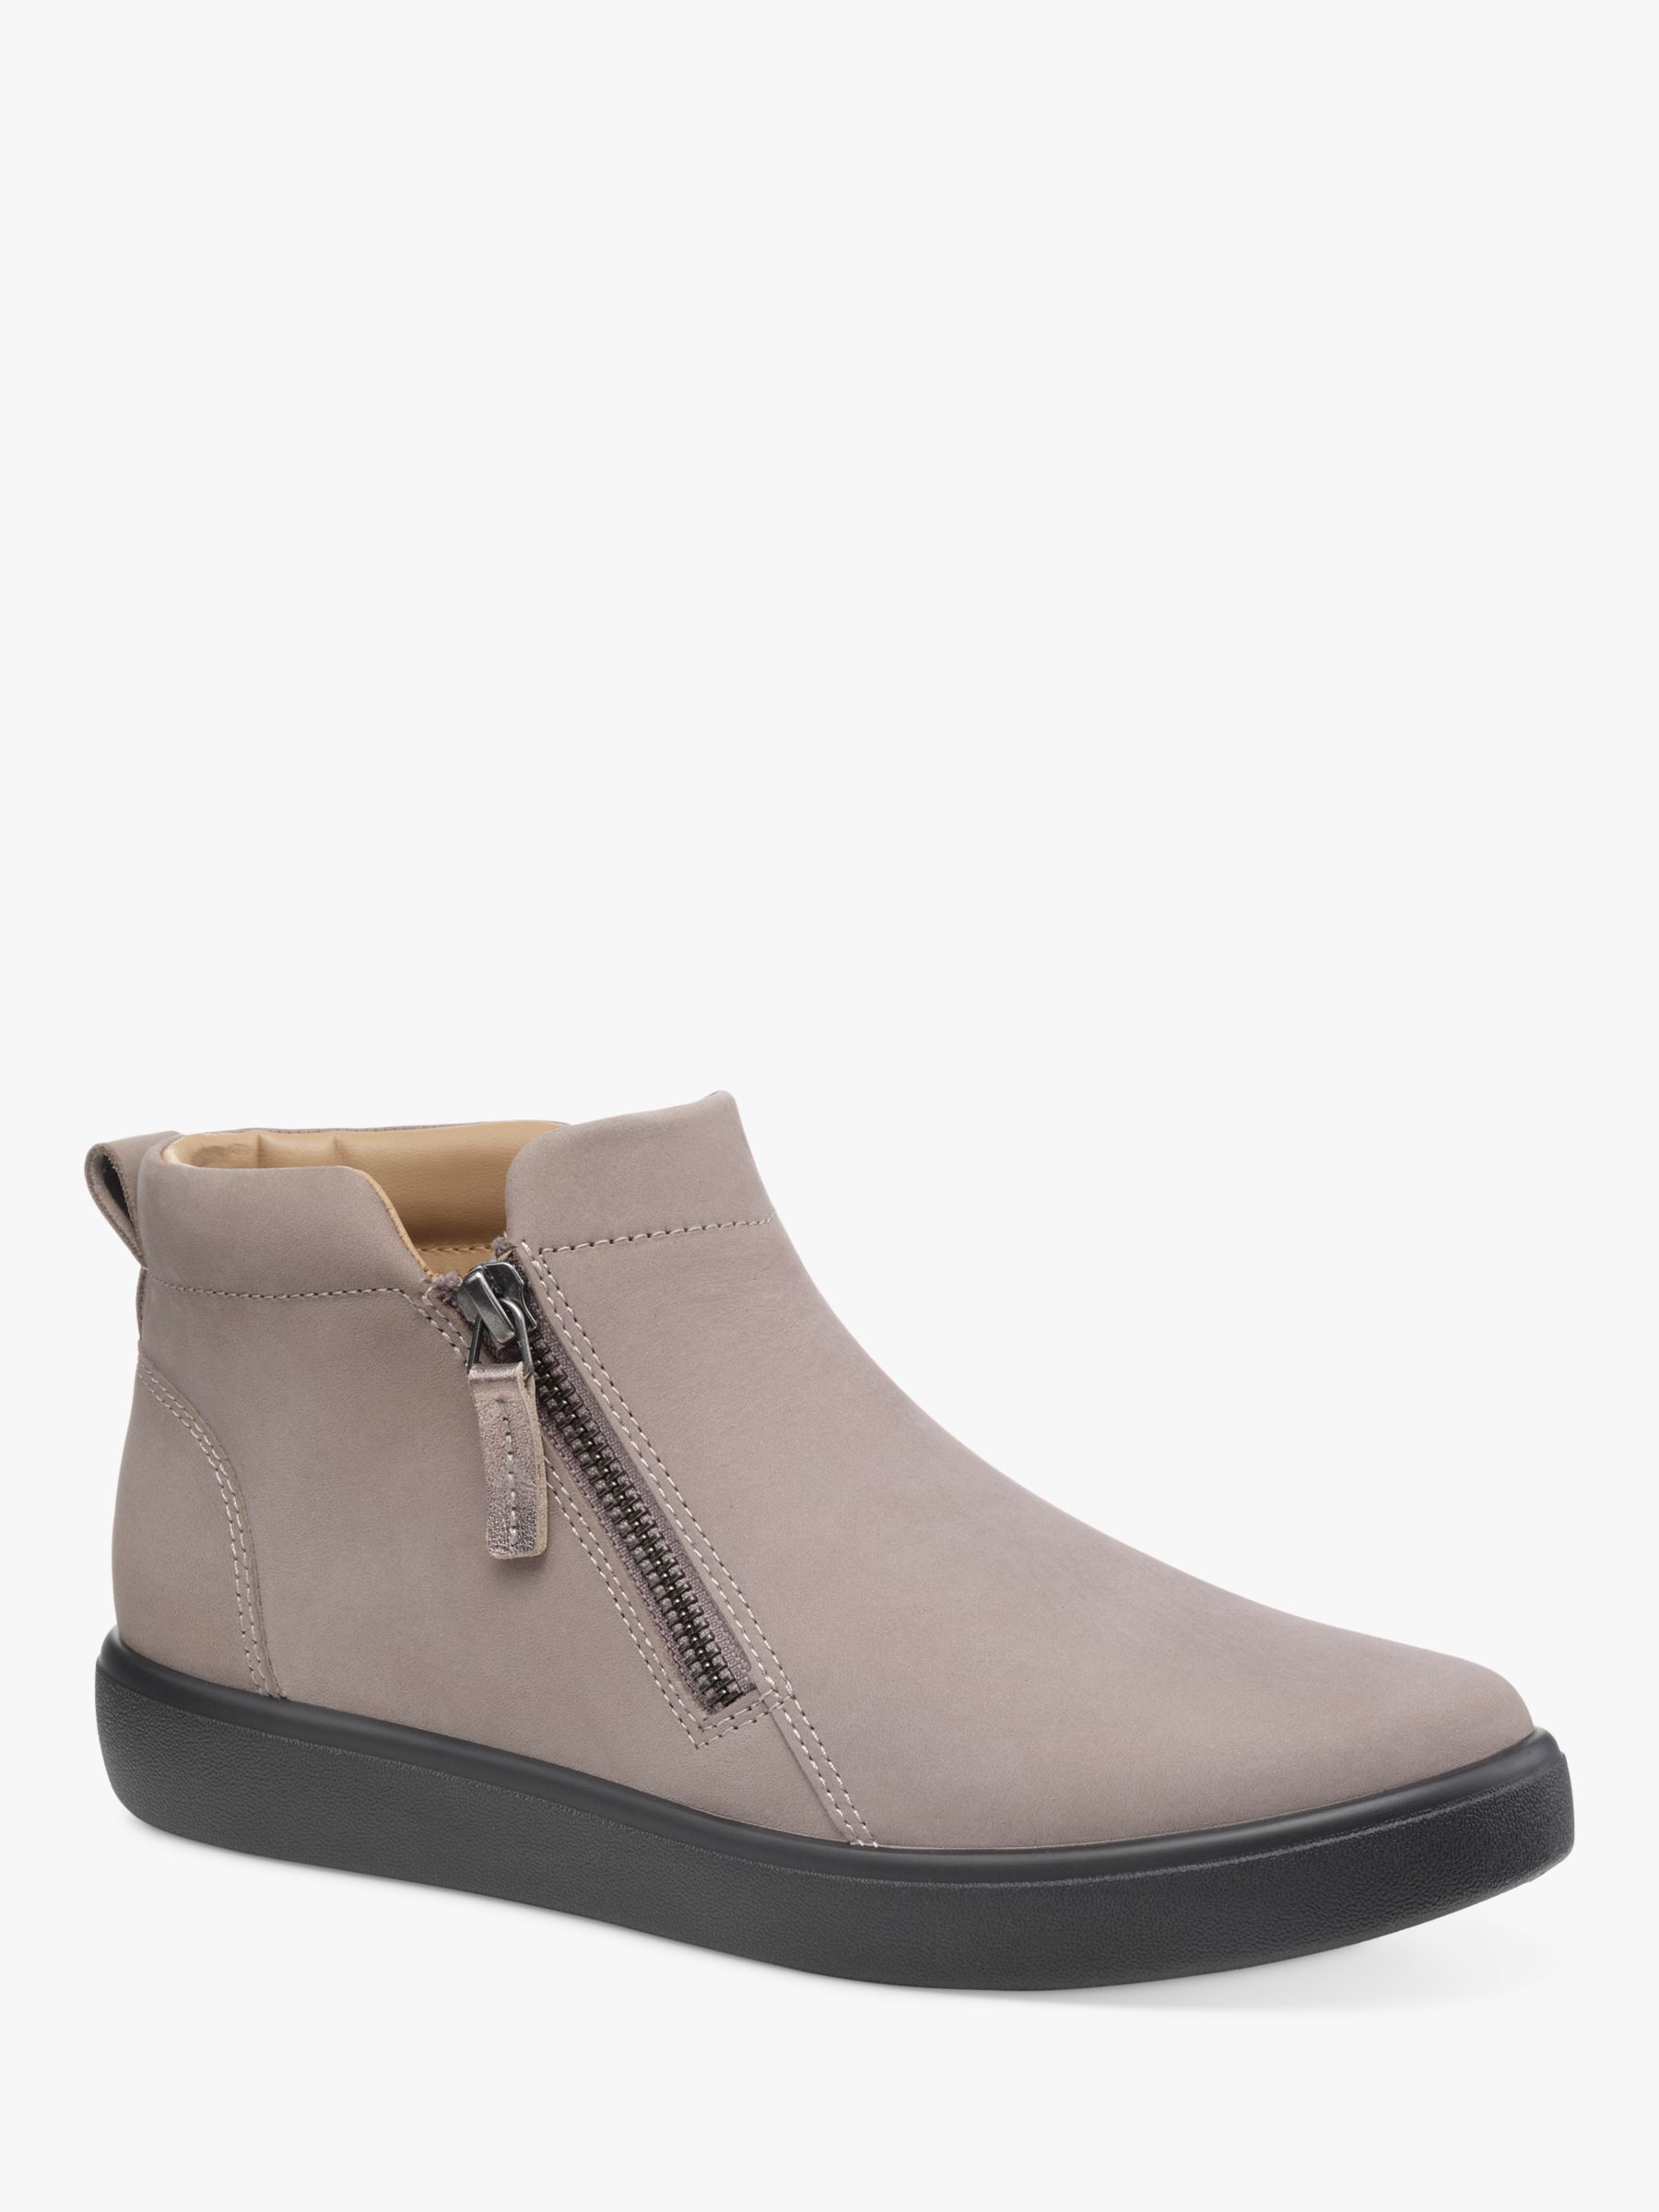 Buy Hotter Jasmine Zipped Ankle Boots Online at johnlewis.com